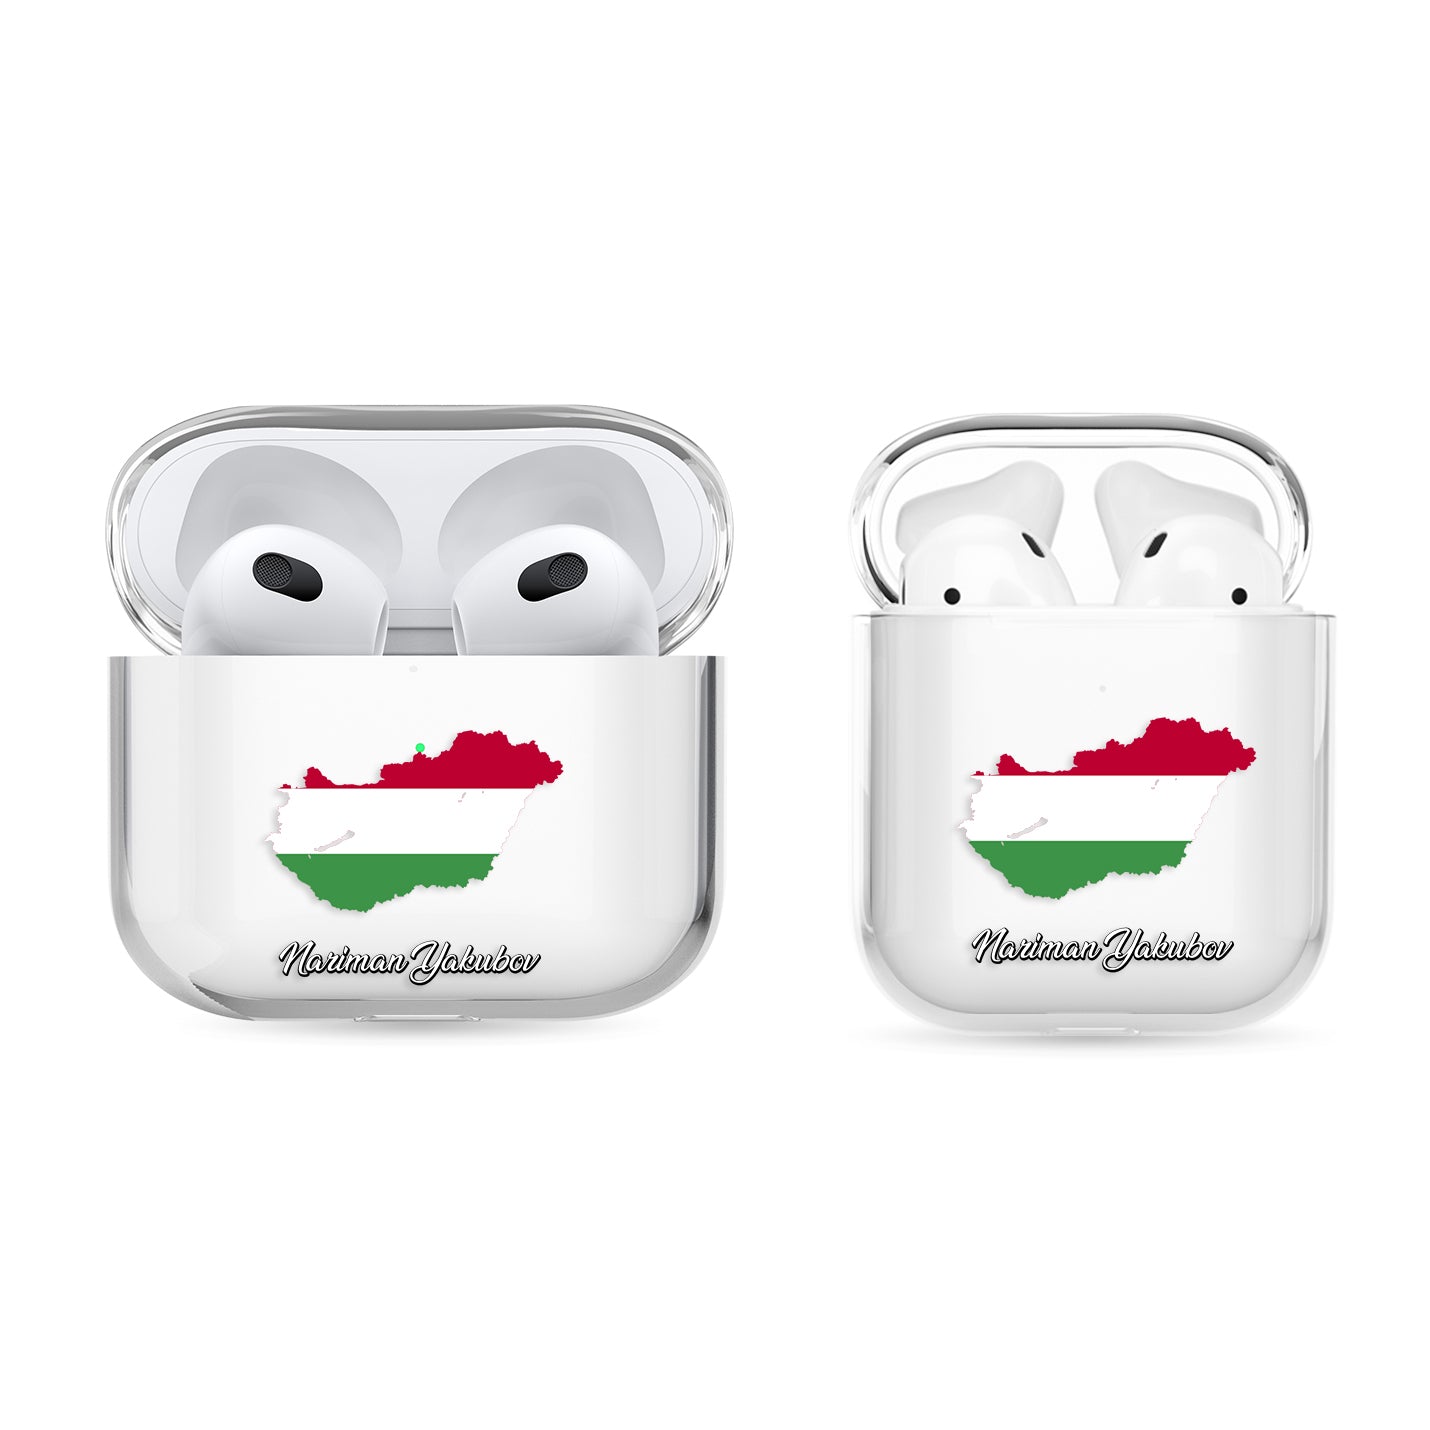 Airpods Hülle - Ungarn Flagge - 1instaphone